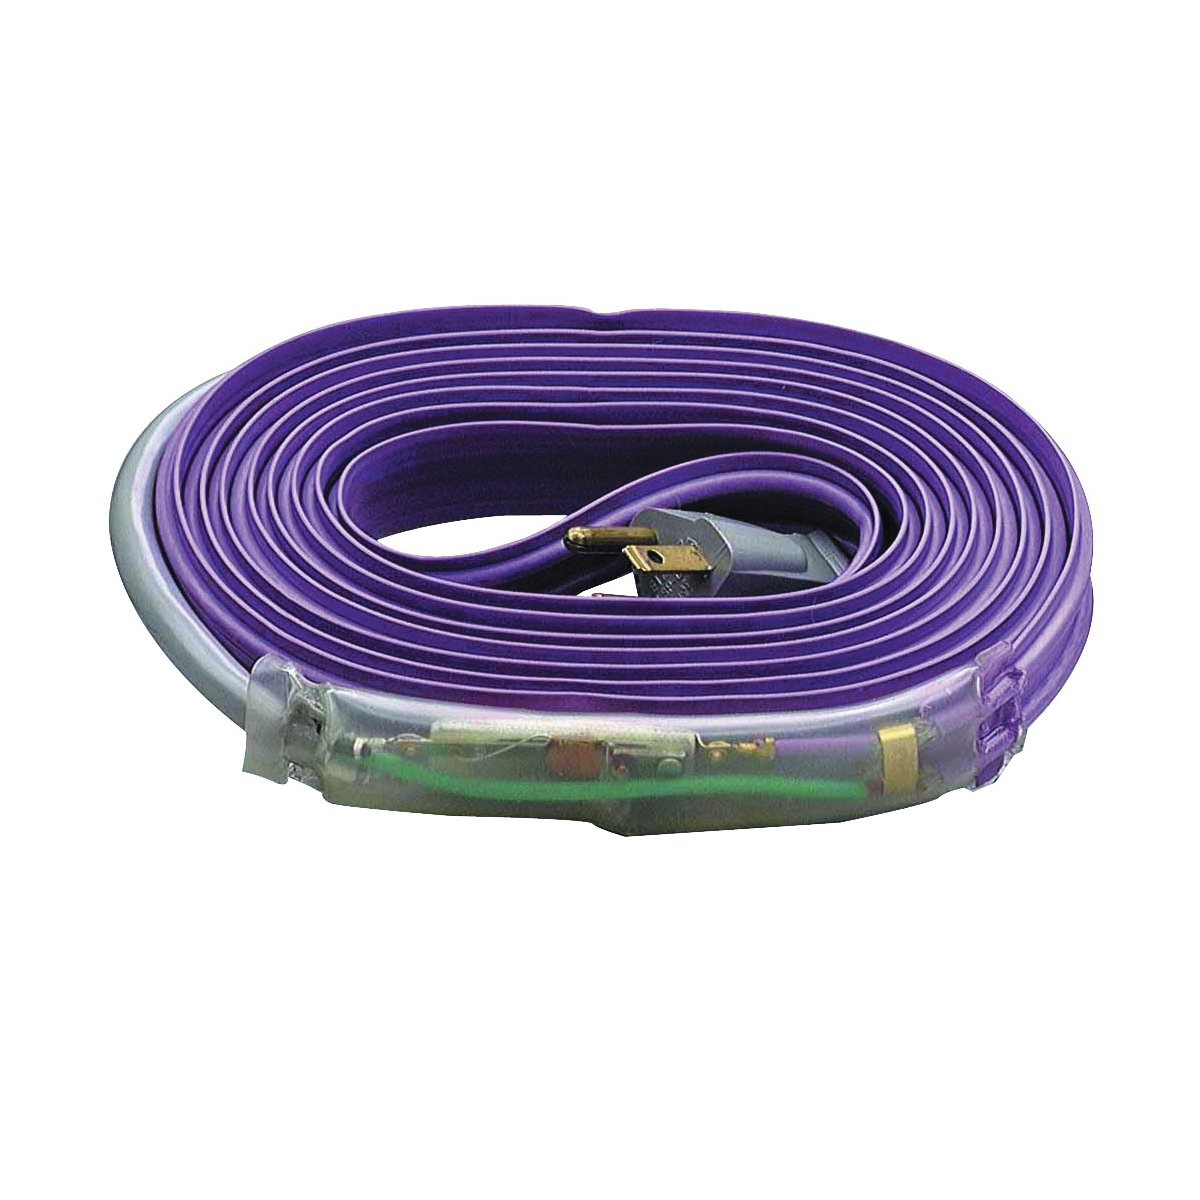 04309 Pipe Heating Cable, 3 ft L